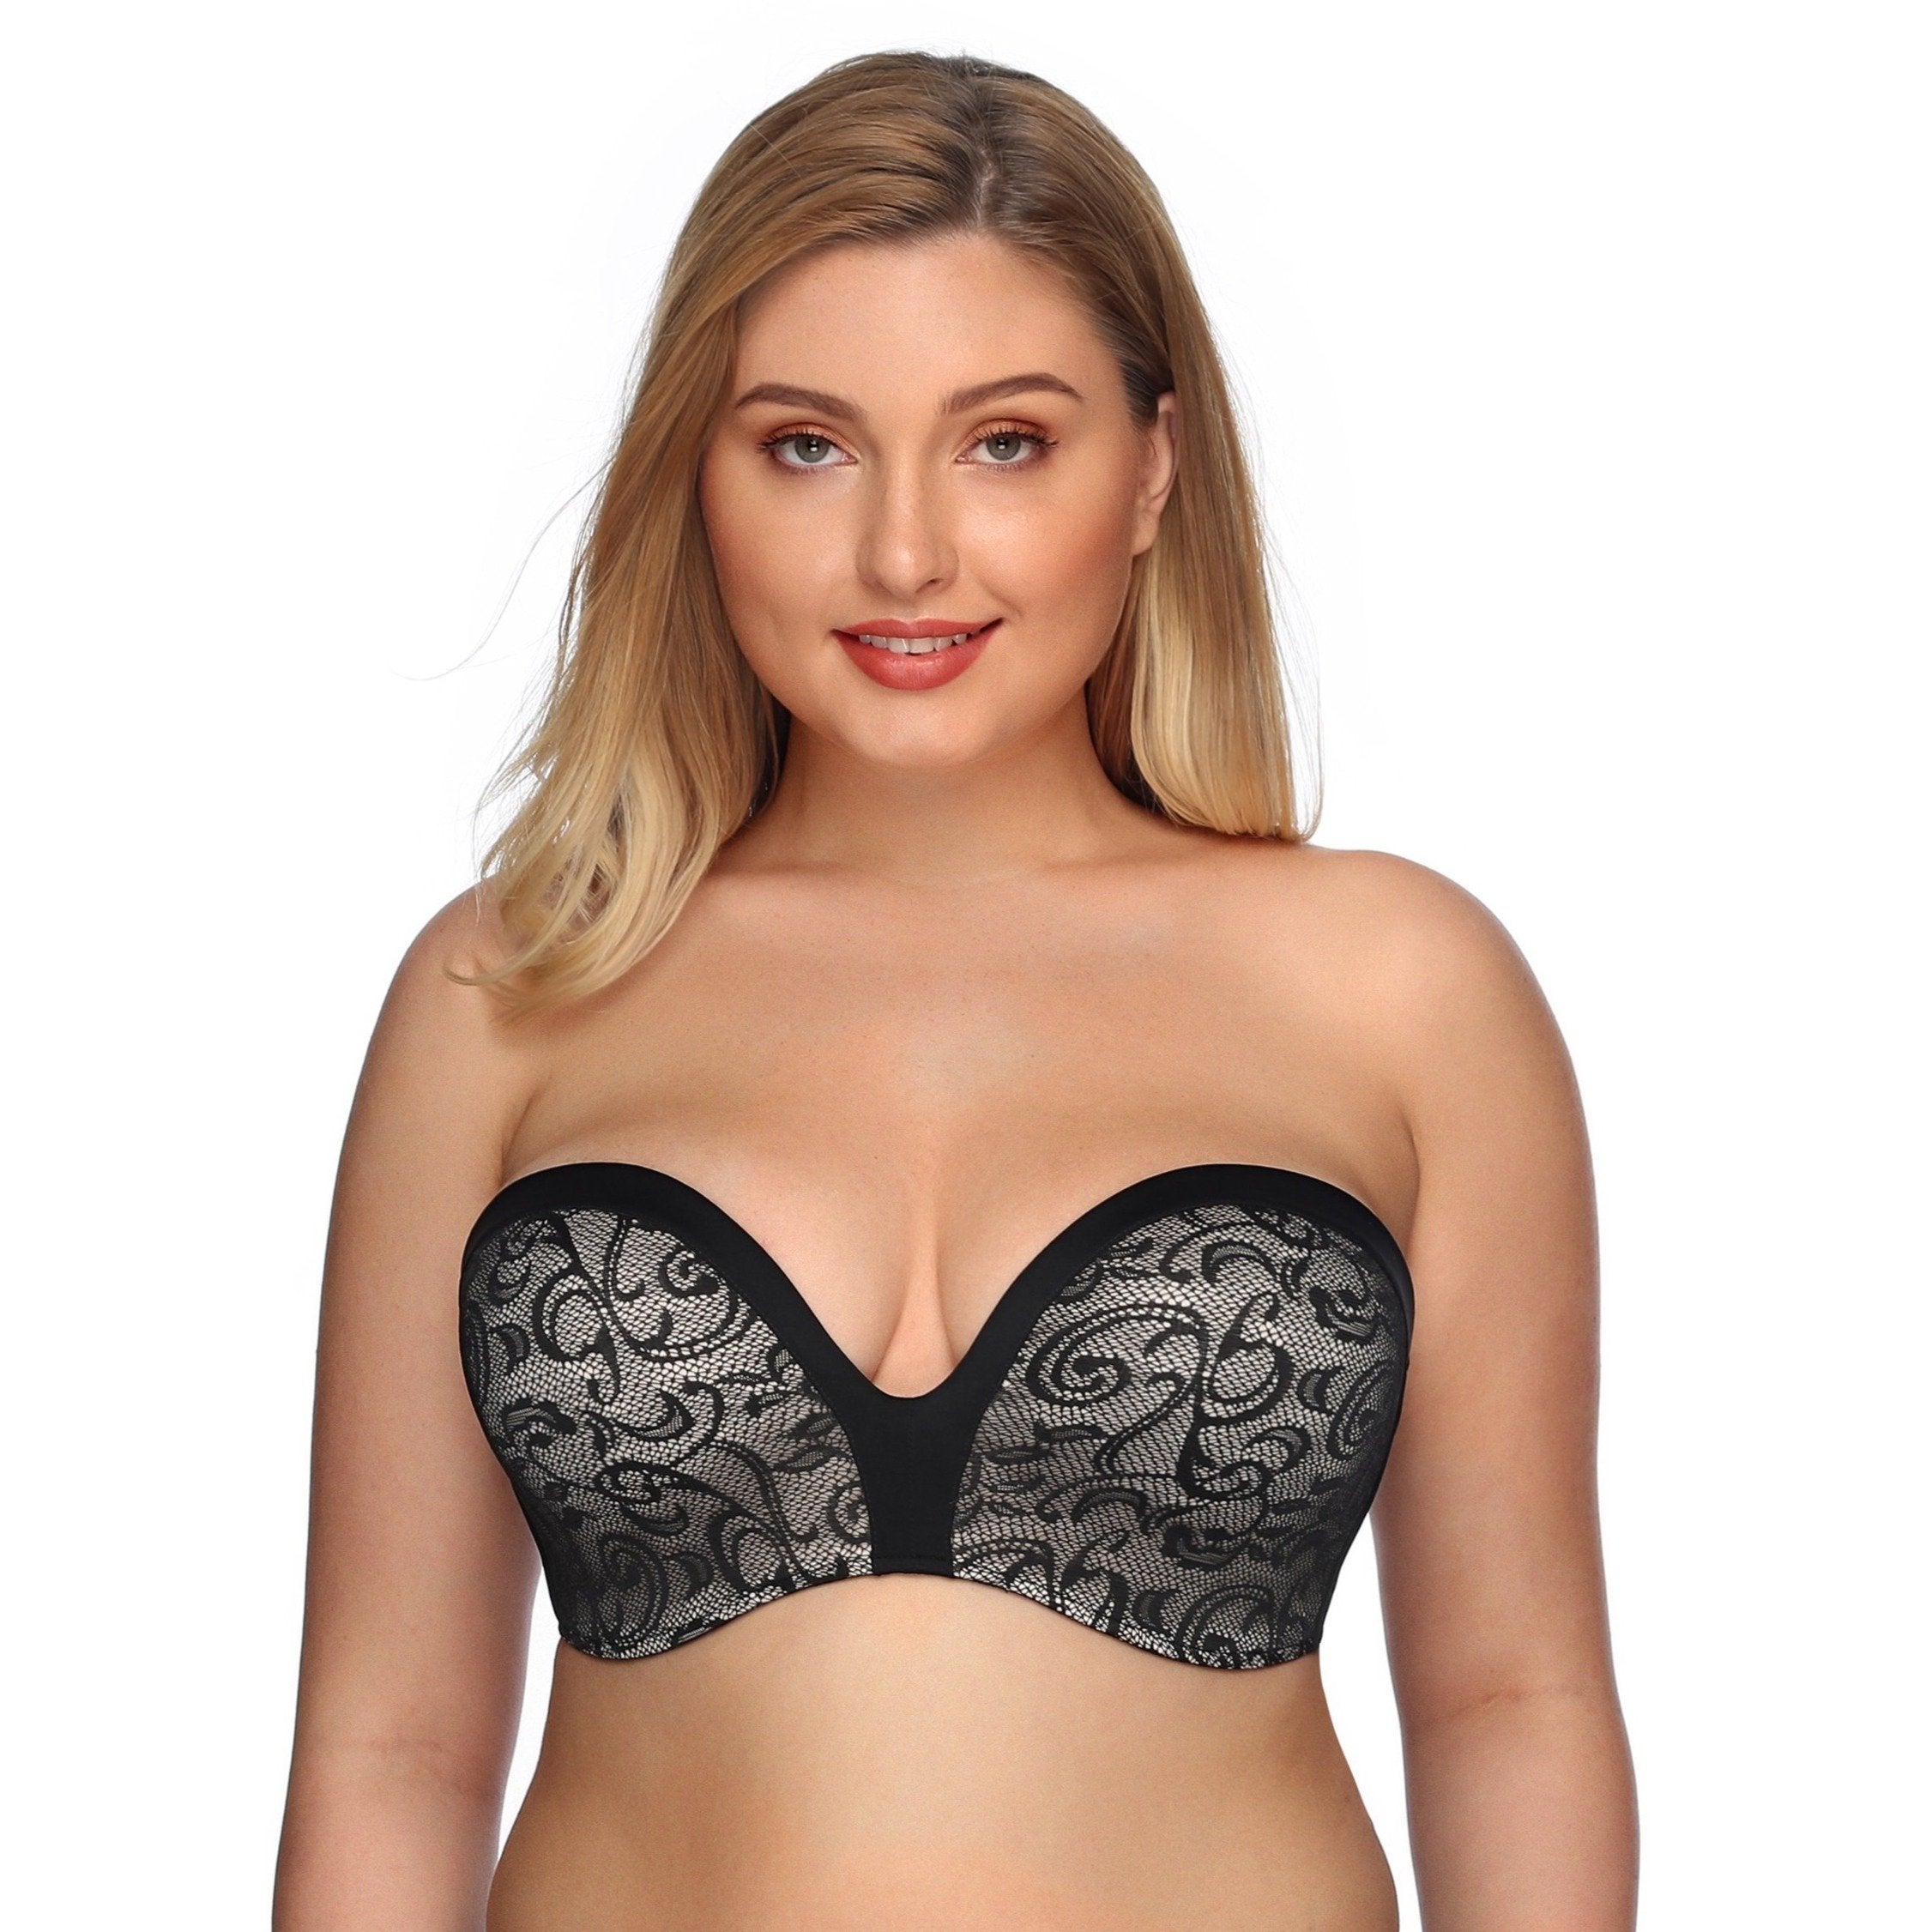 Shop Online For the Perfect Lift & Support with Lace Strapless